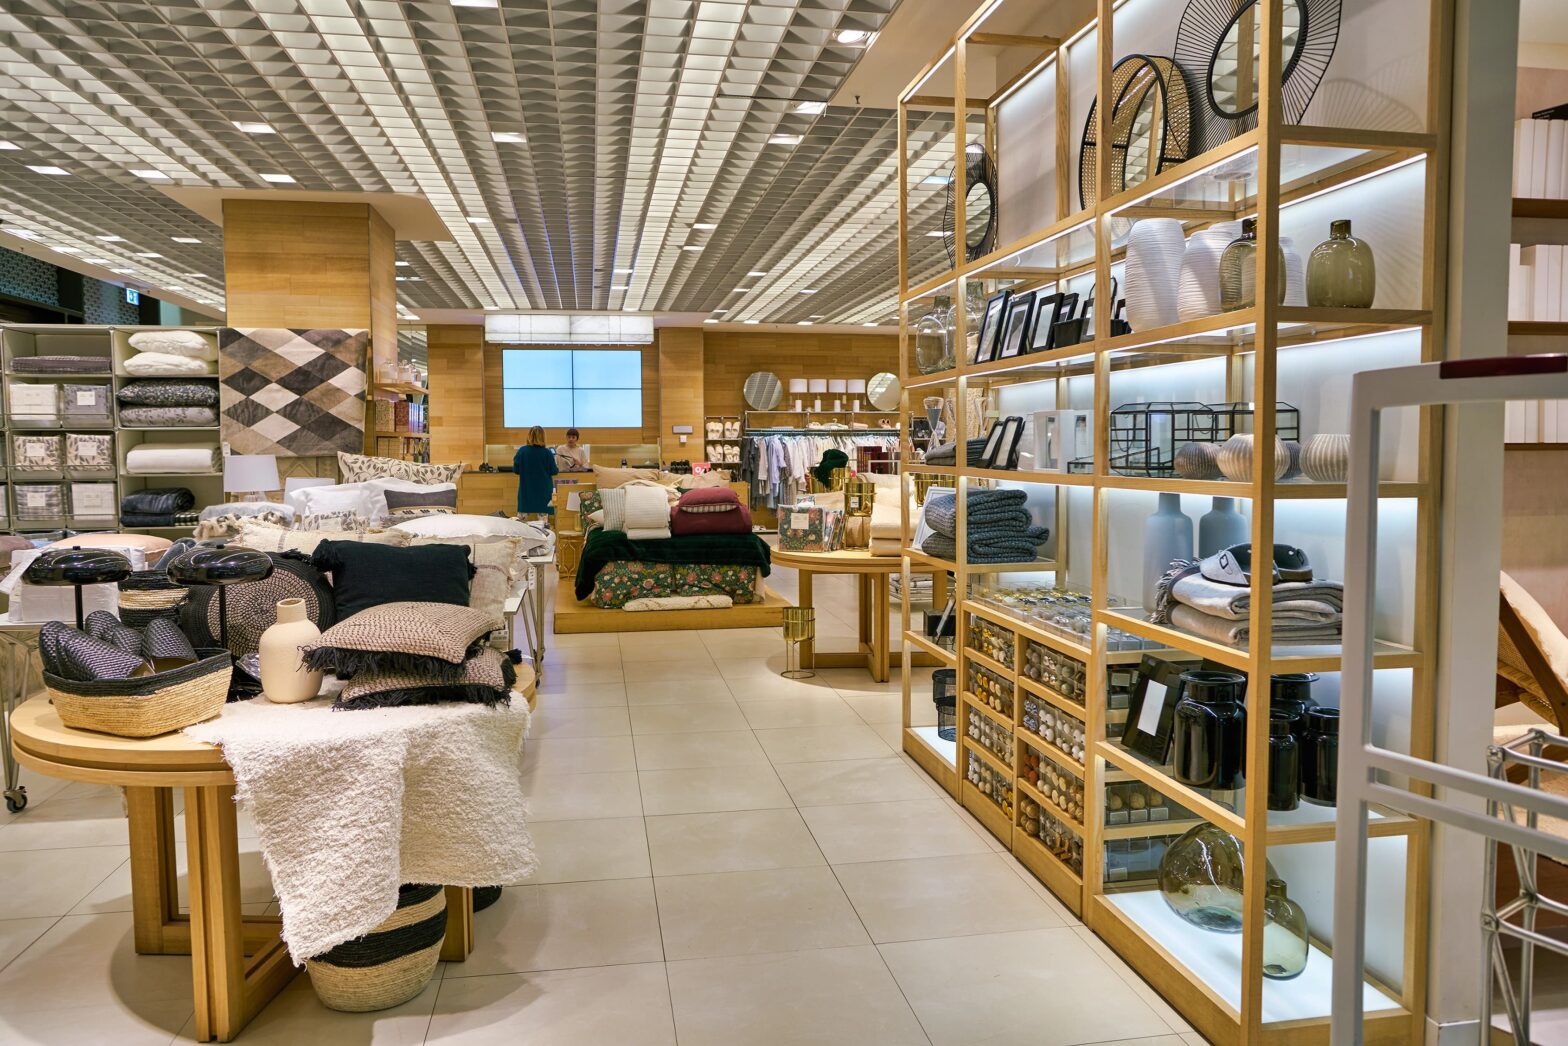 commercial millwork in retail space